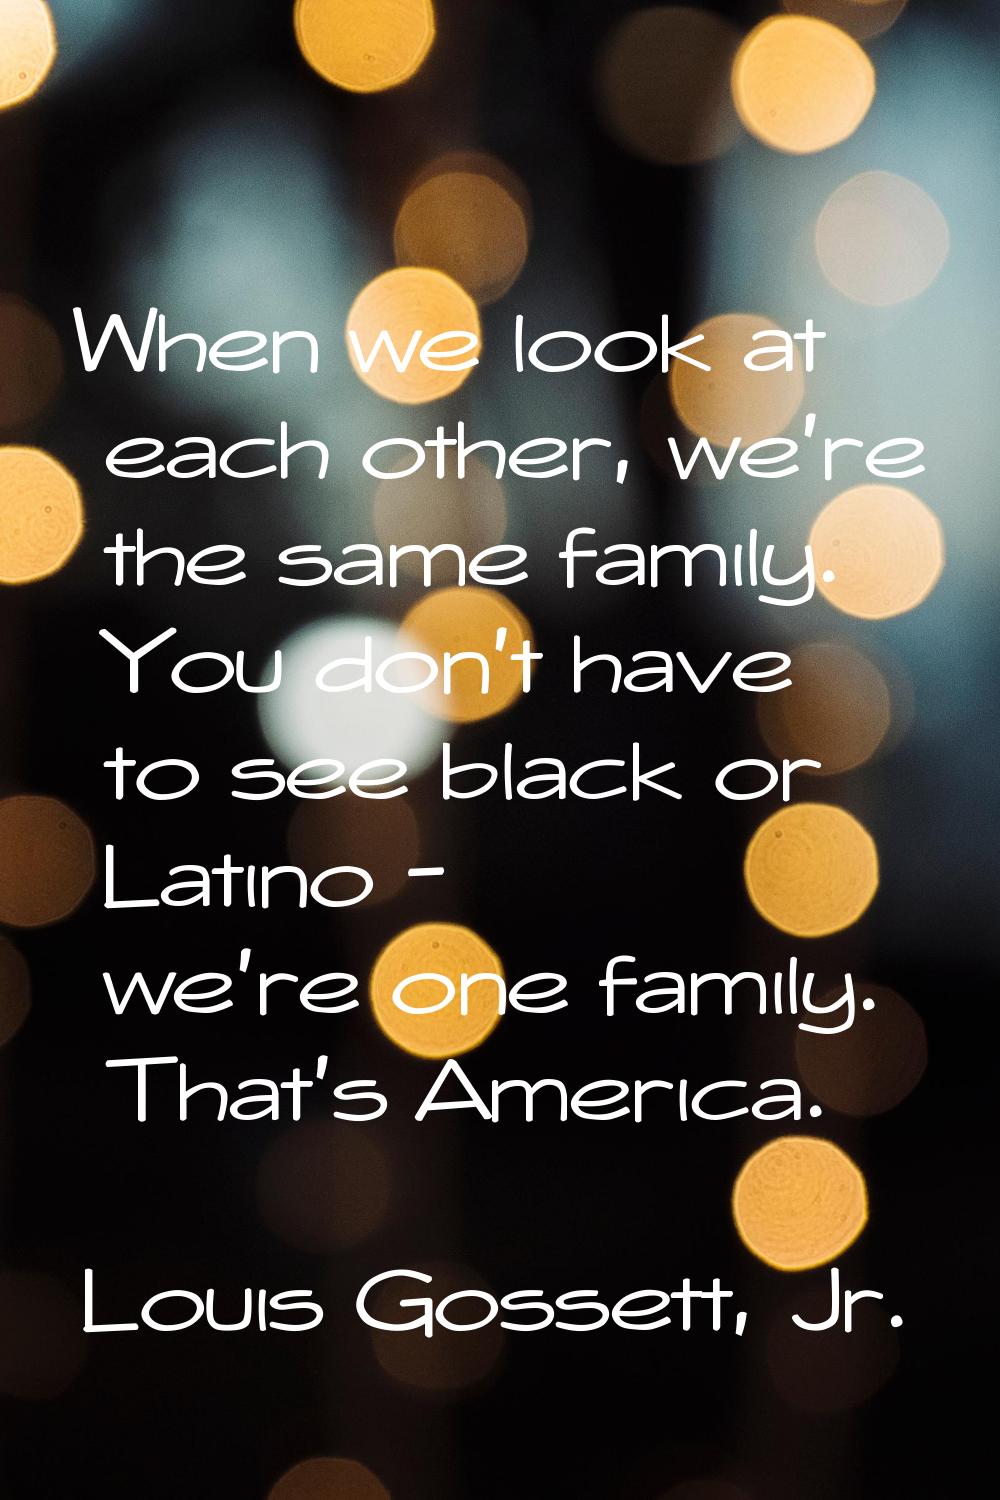 When we look at each other, we're the same family. You don't have to see black or Latino - we're on